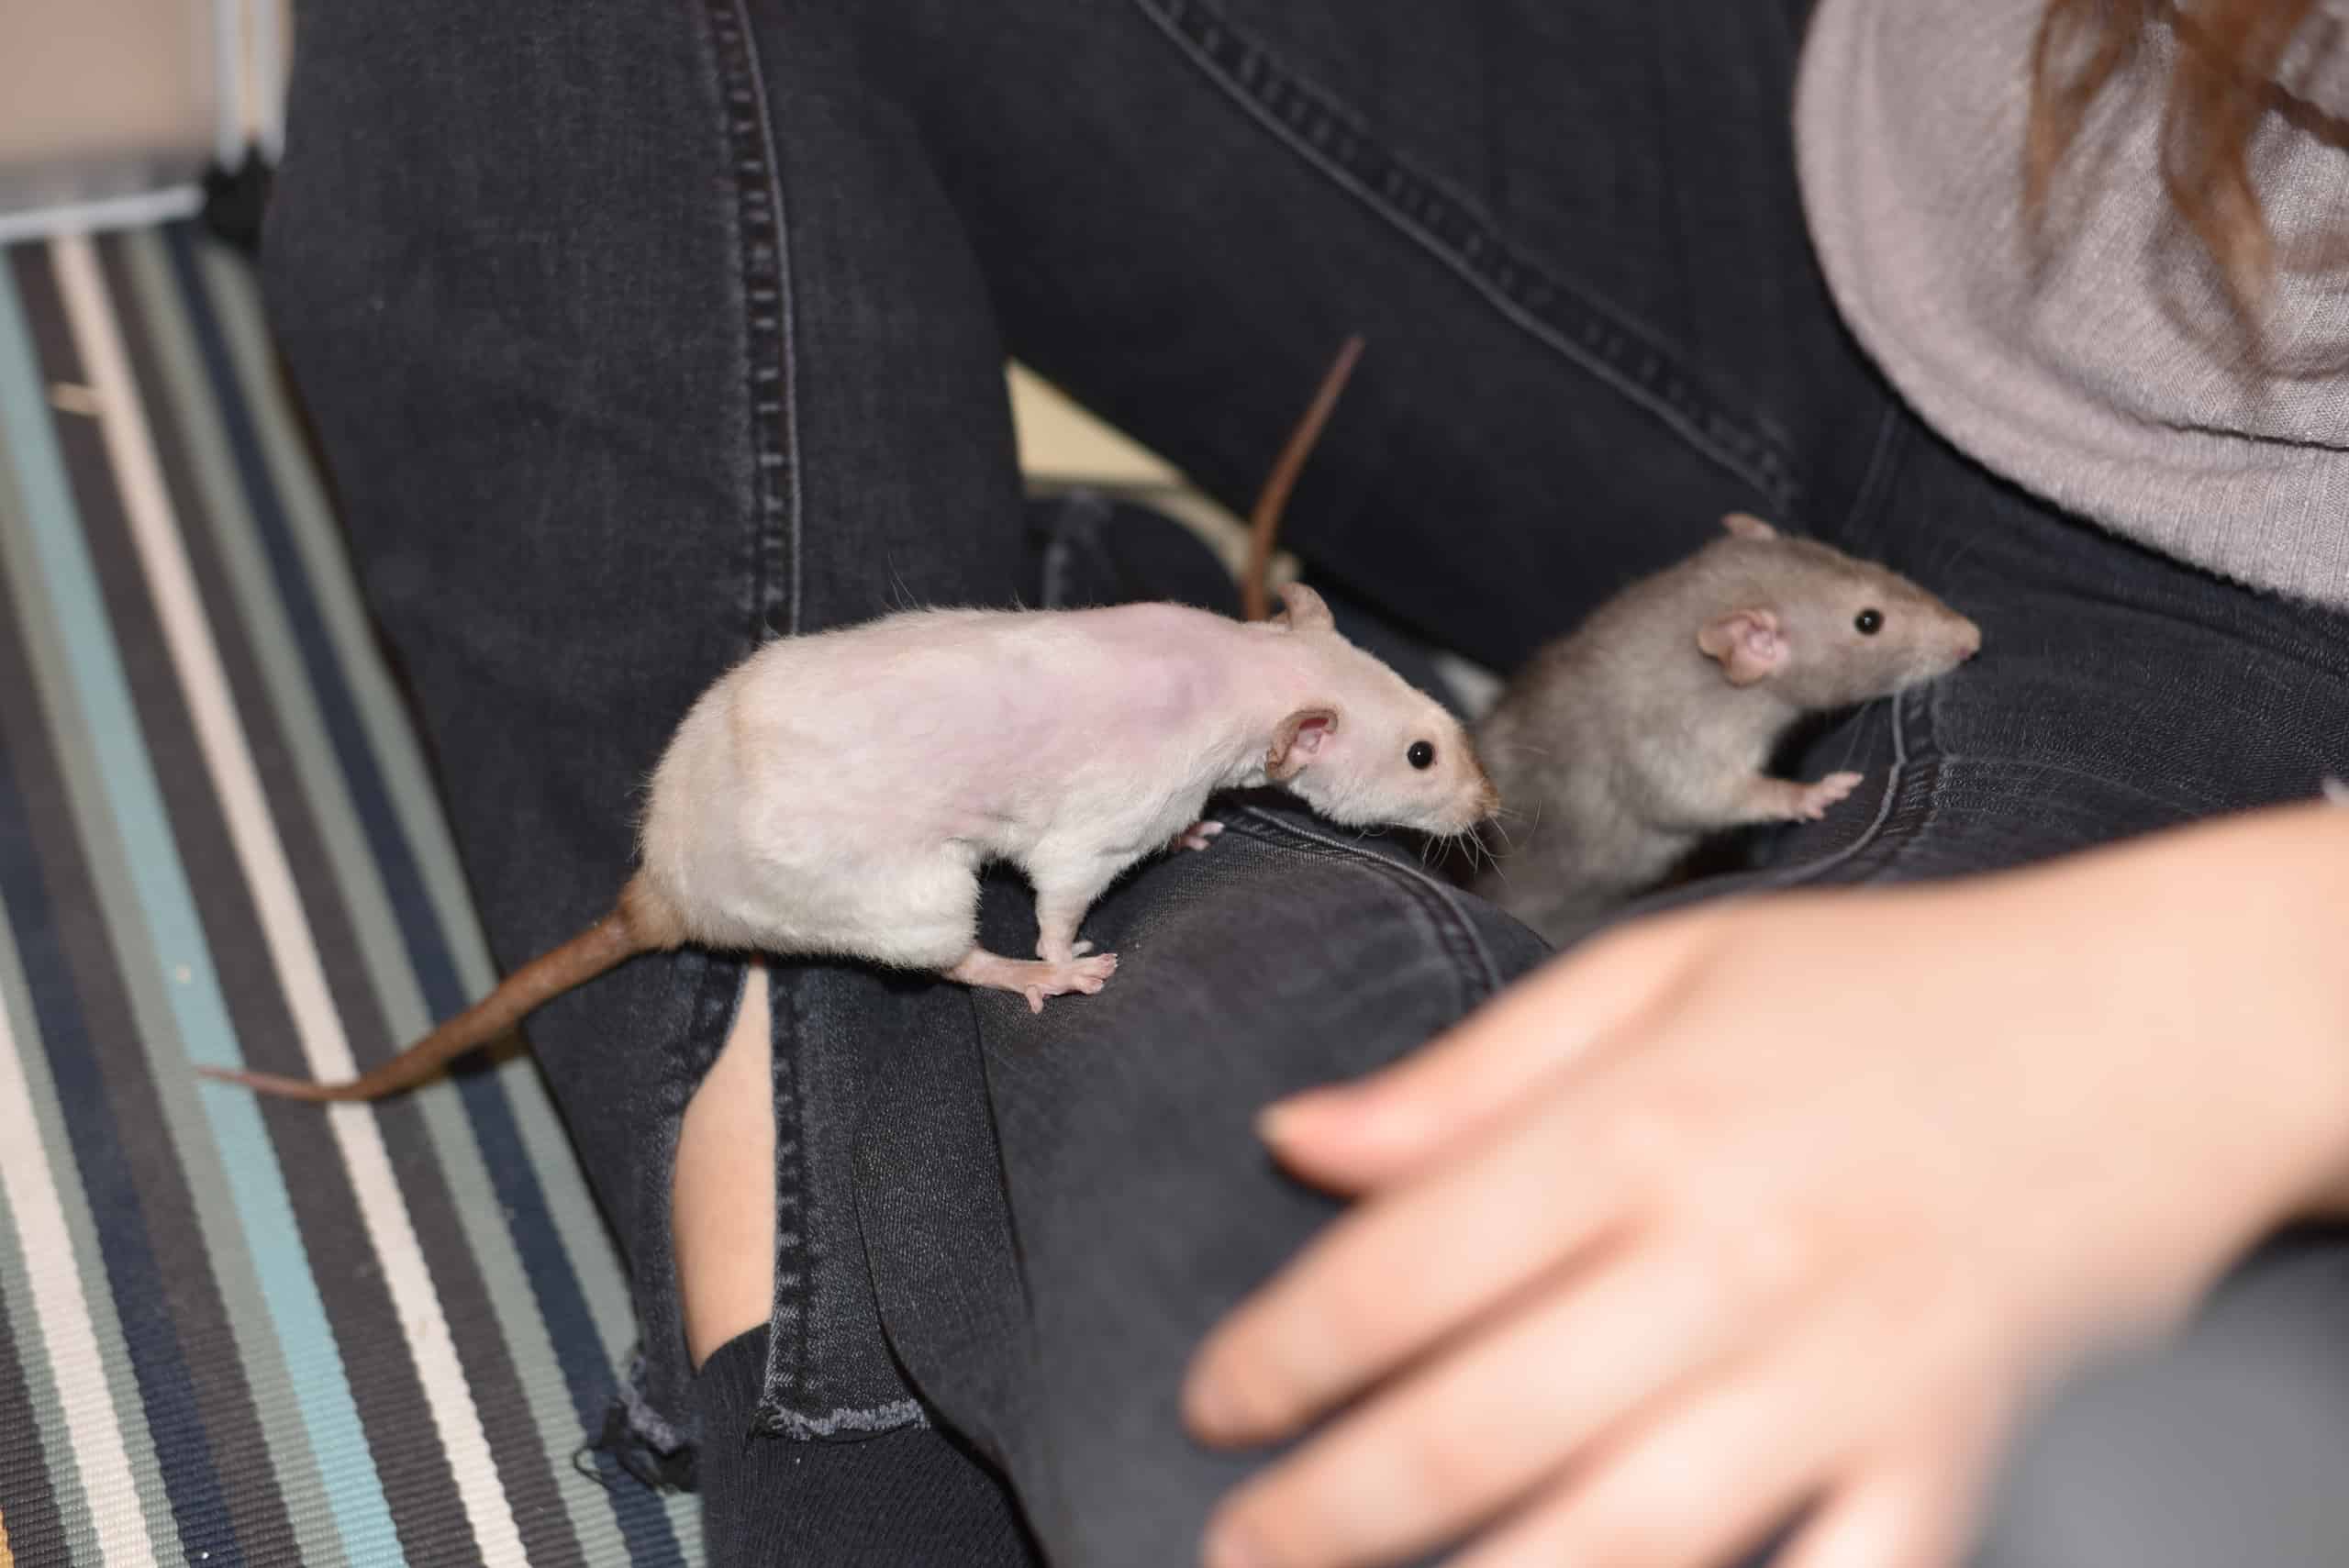 two rats on someone's leg